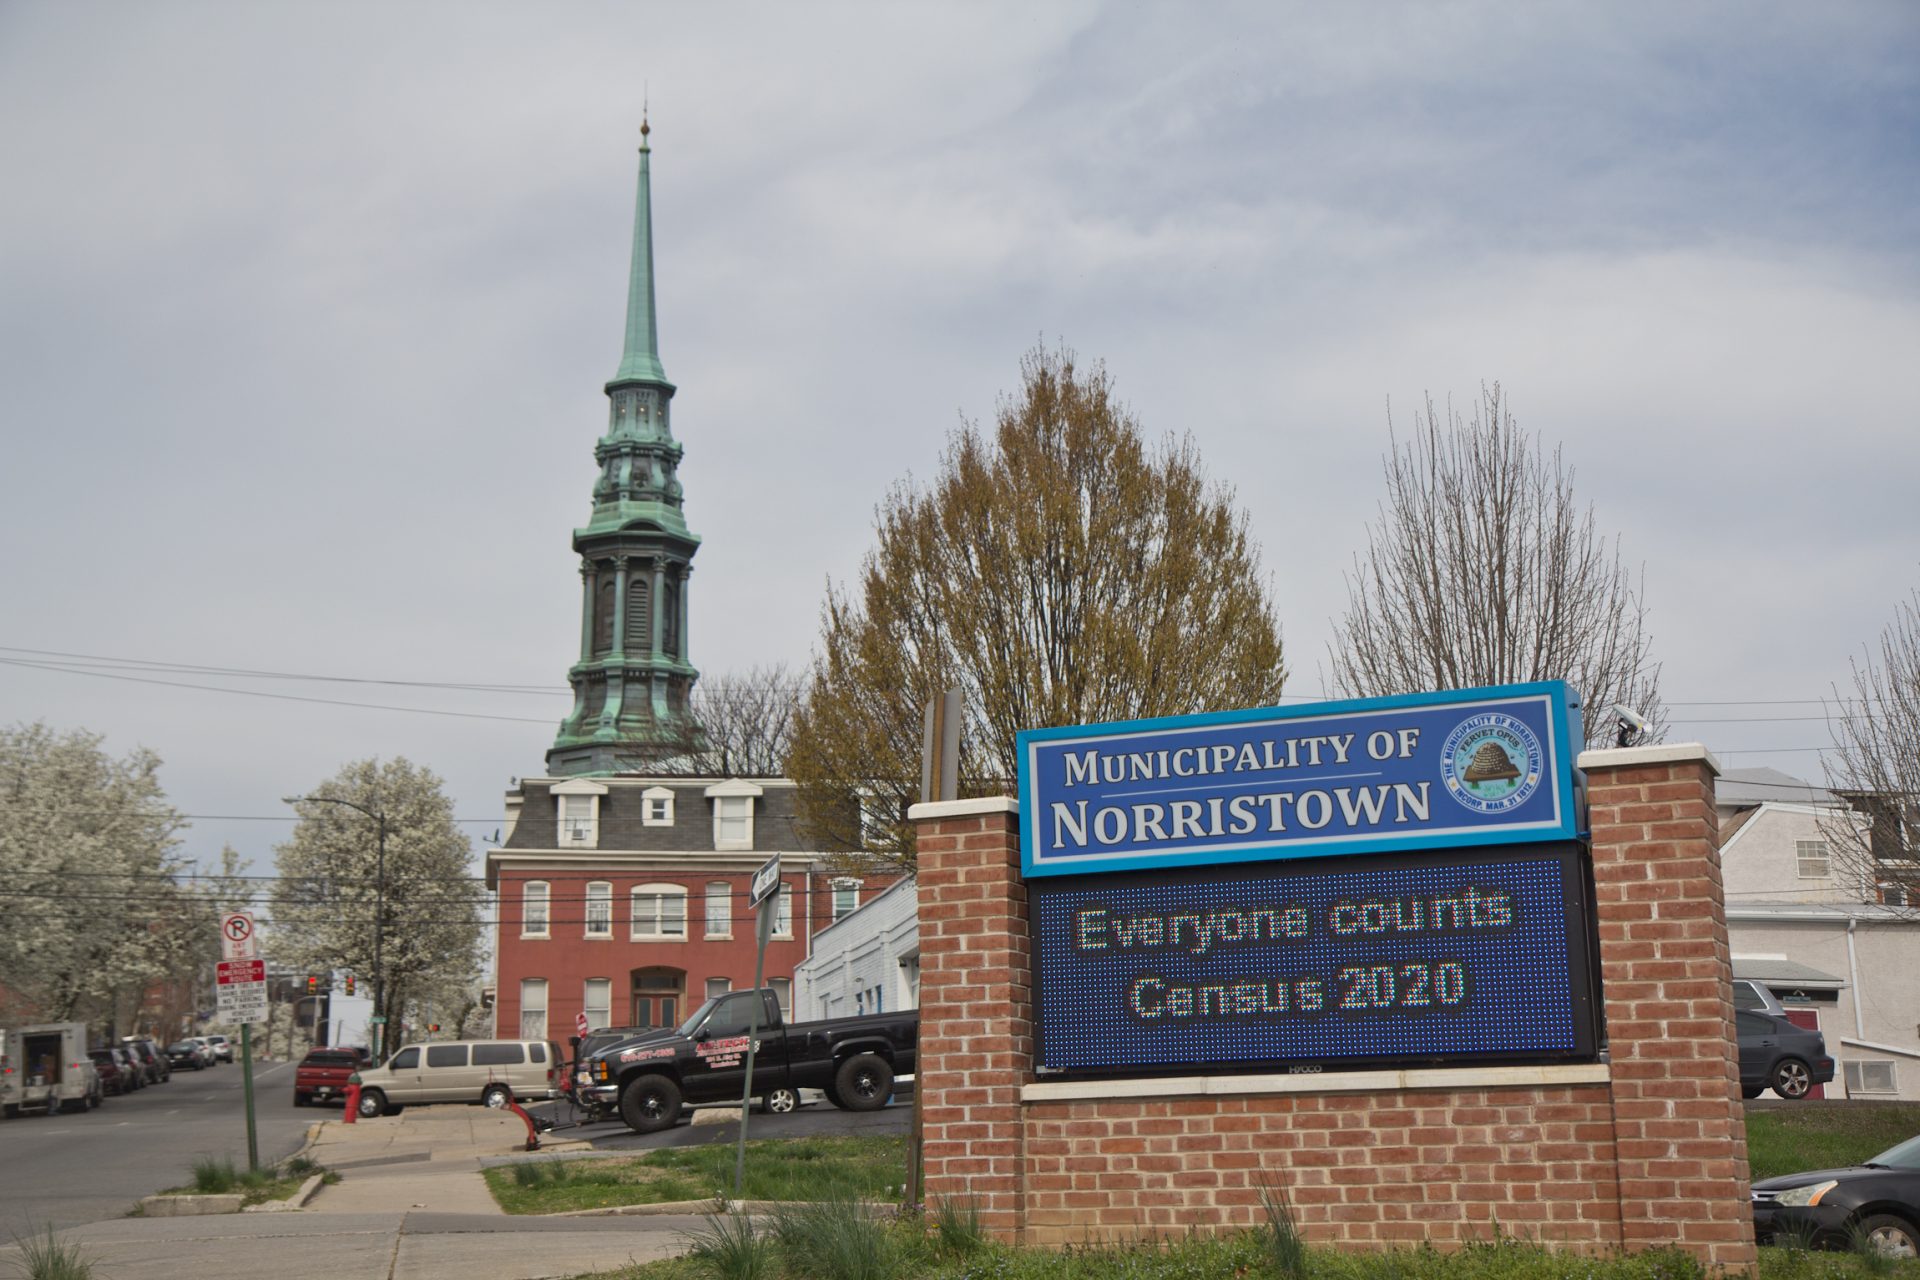 A digital information sign at Norristown’s municipal complex advertises the 2020 census.